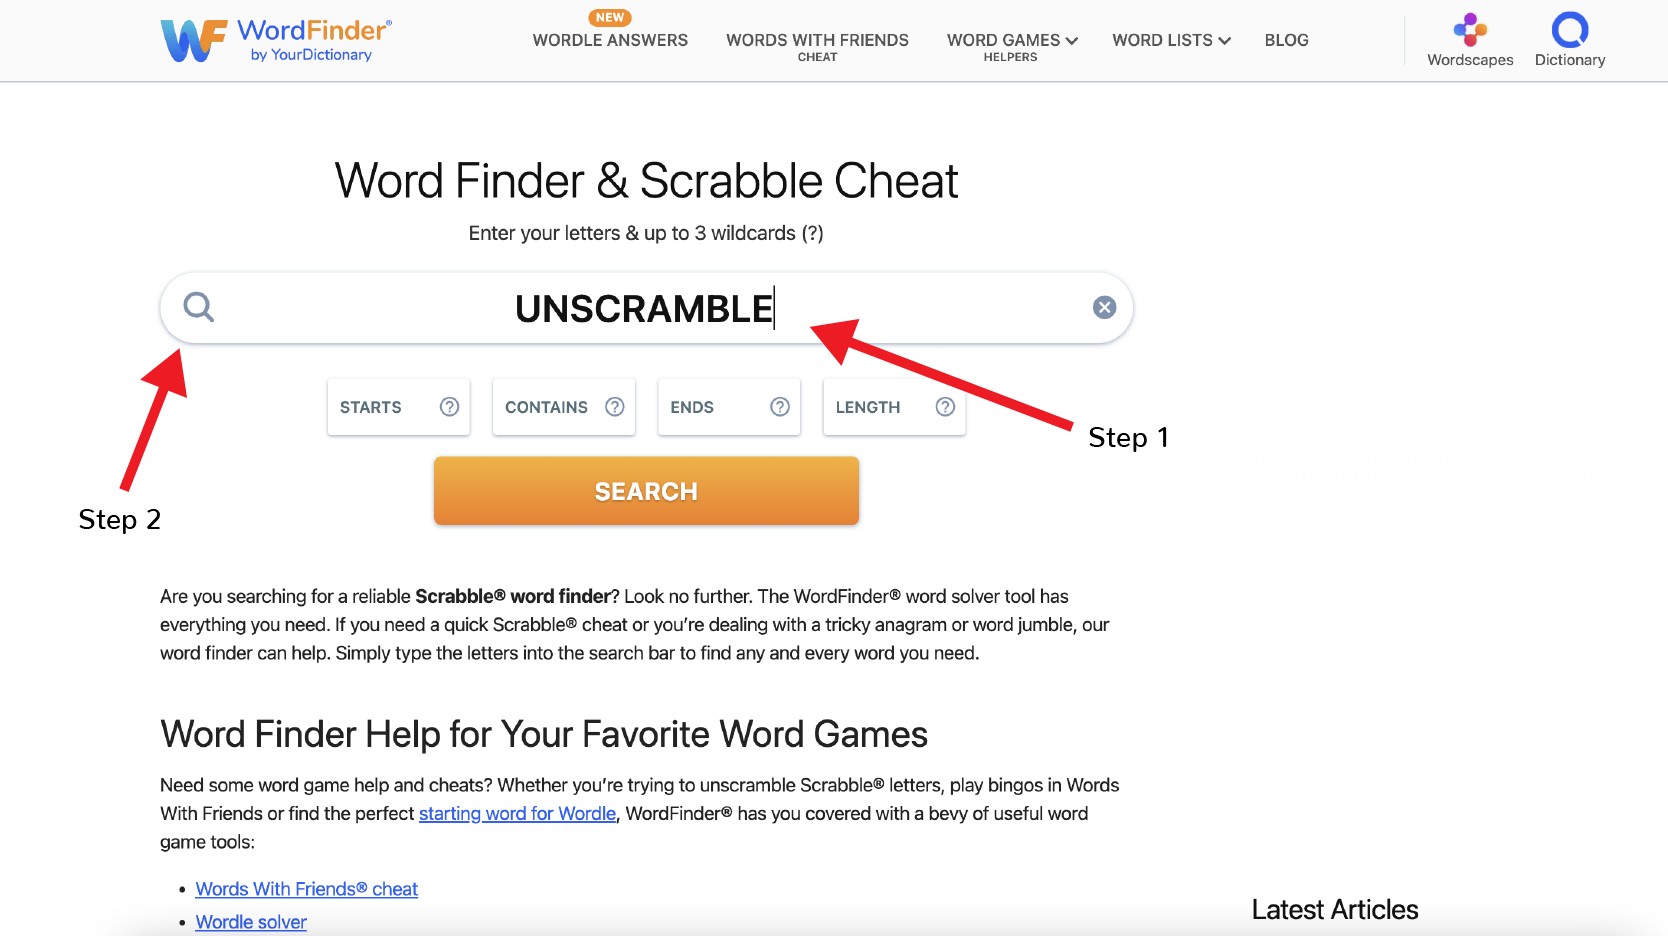 Enter your letters on WordFinder